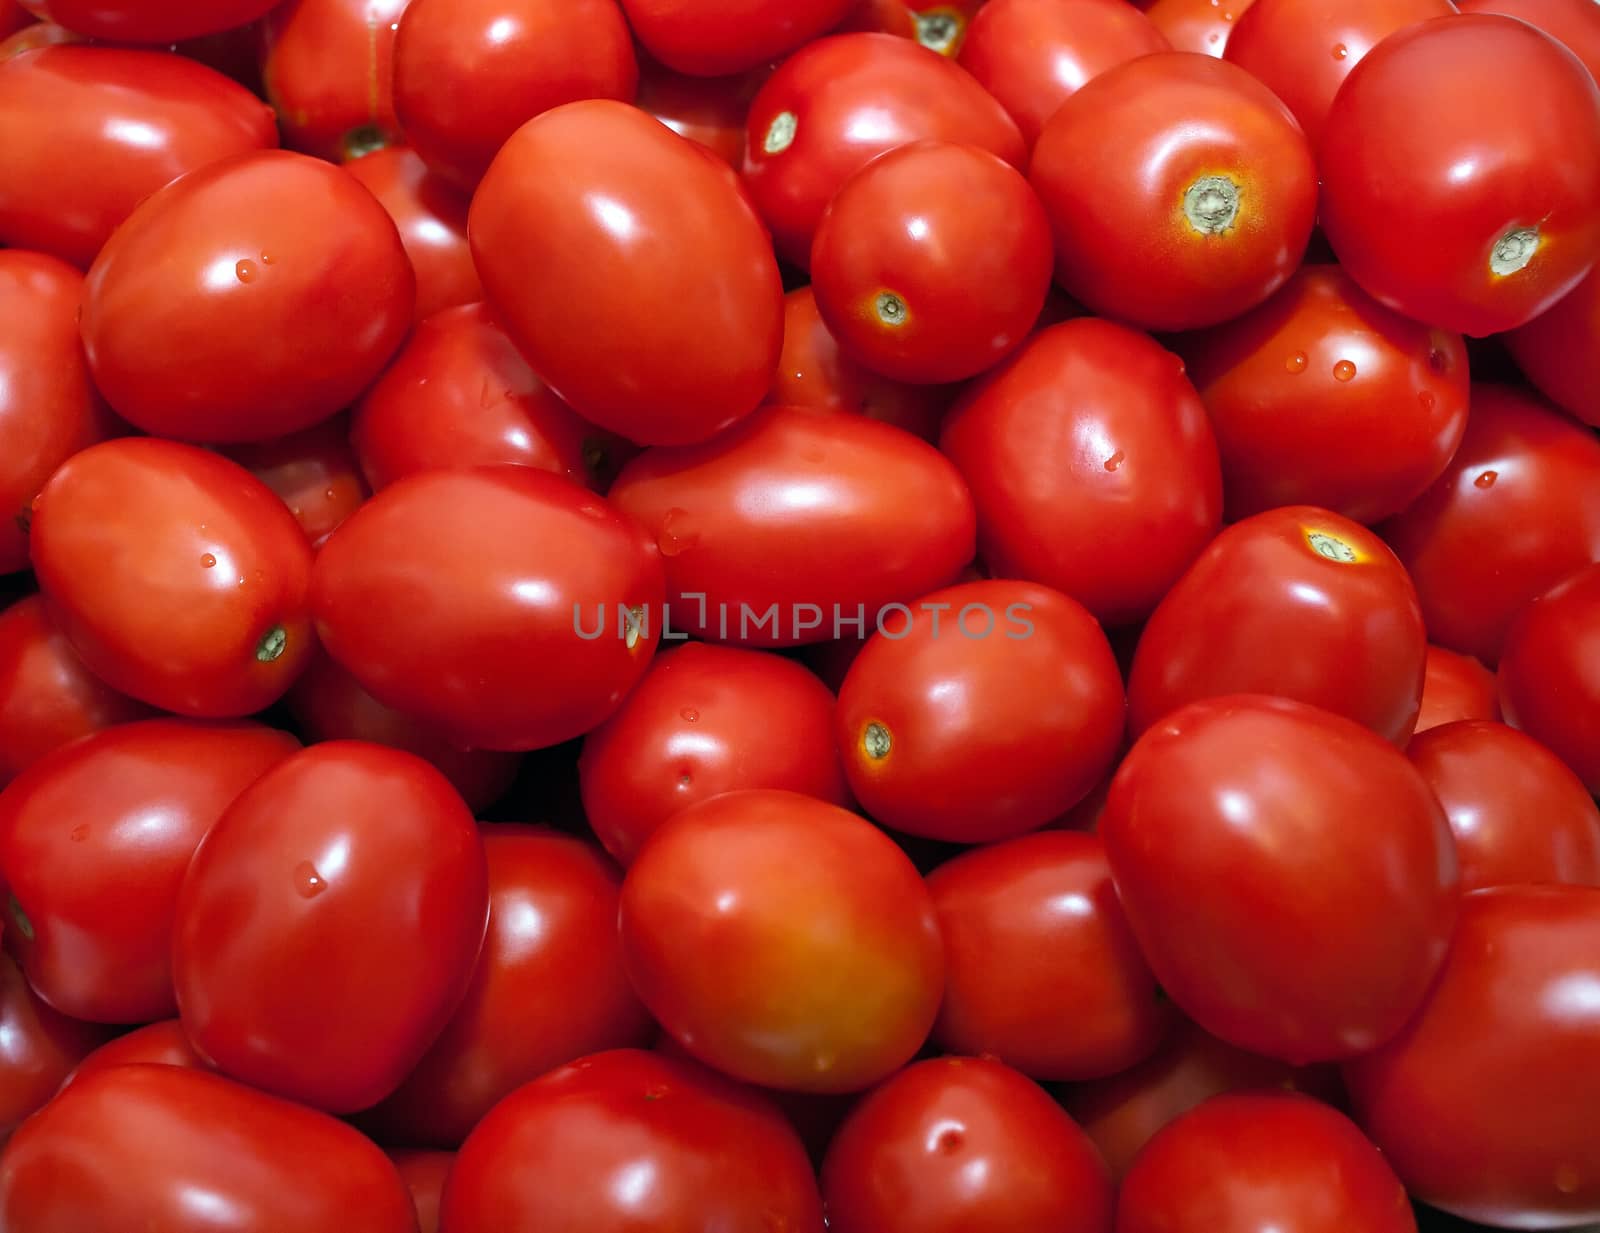 General view of the tomato red oval